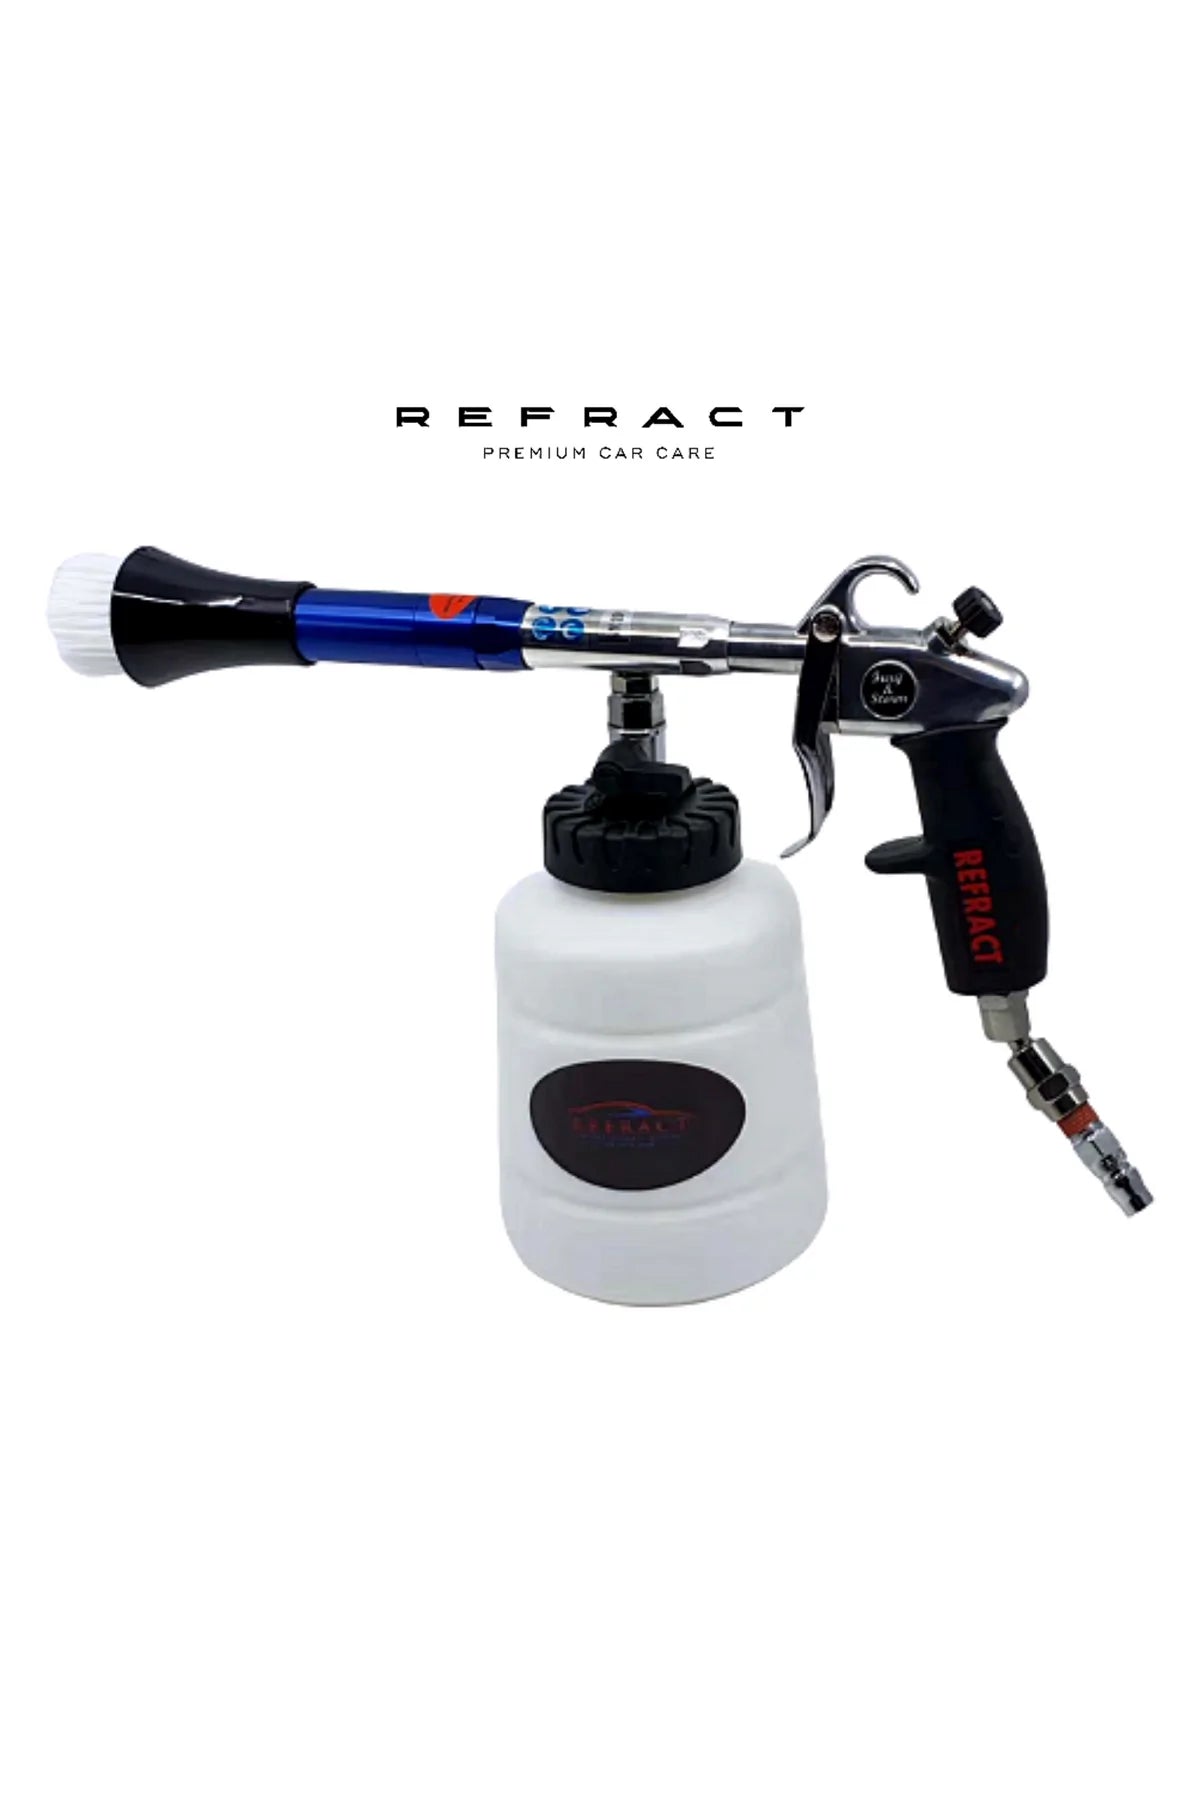 Refract Car Care “Fury and Storm” Cleaning Gun Tornador